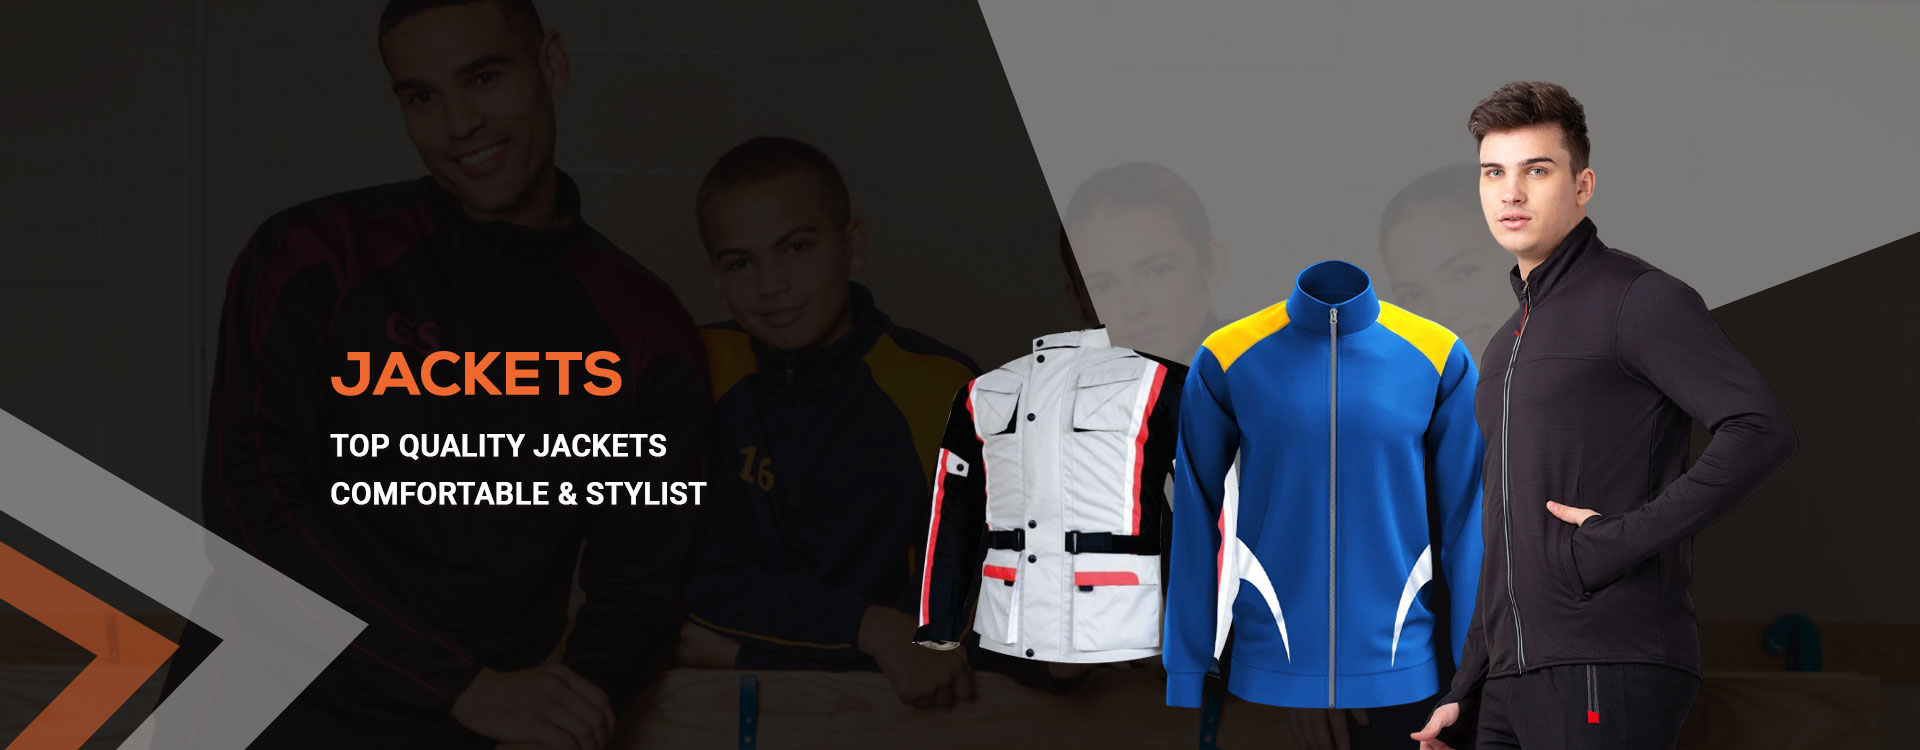 Jacket Manufacturers in USA